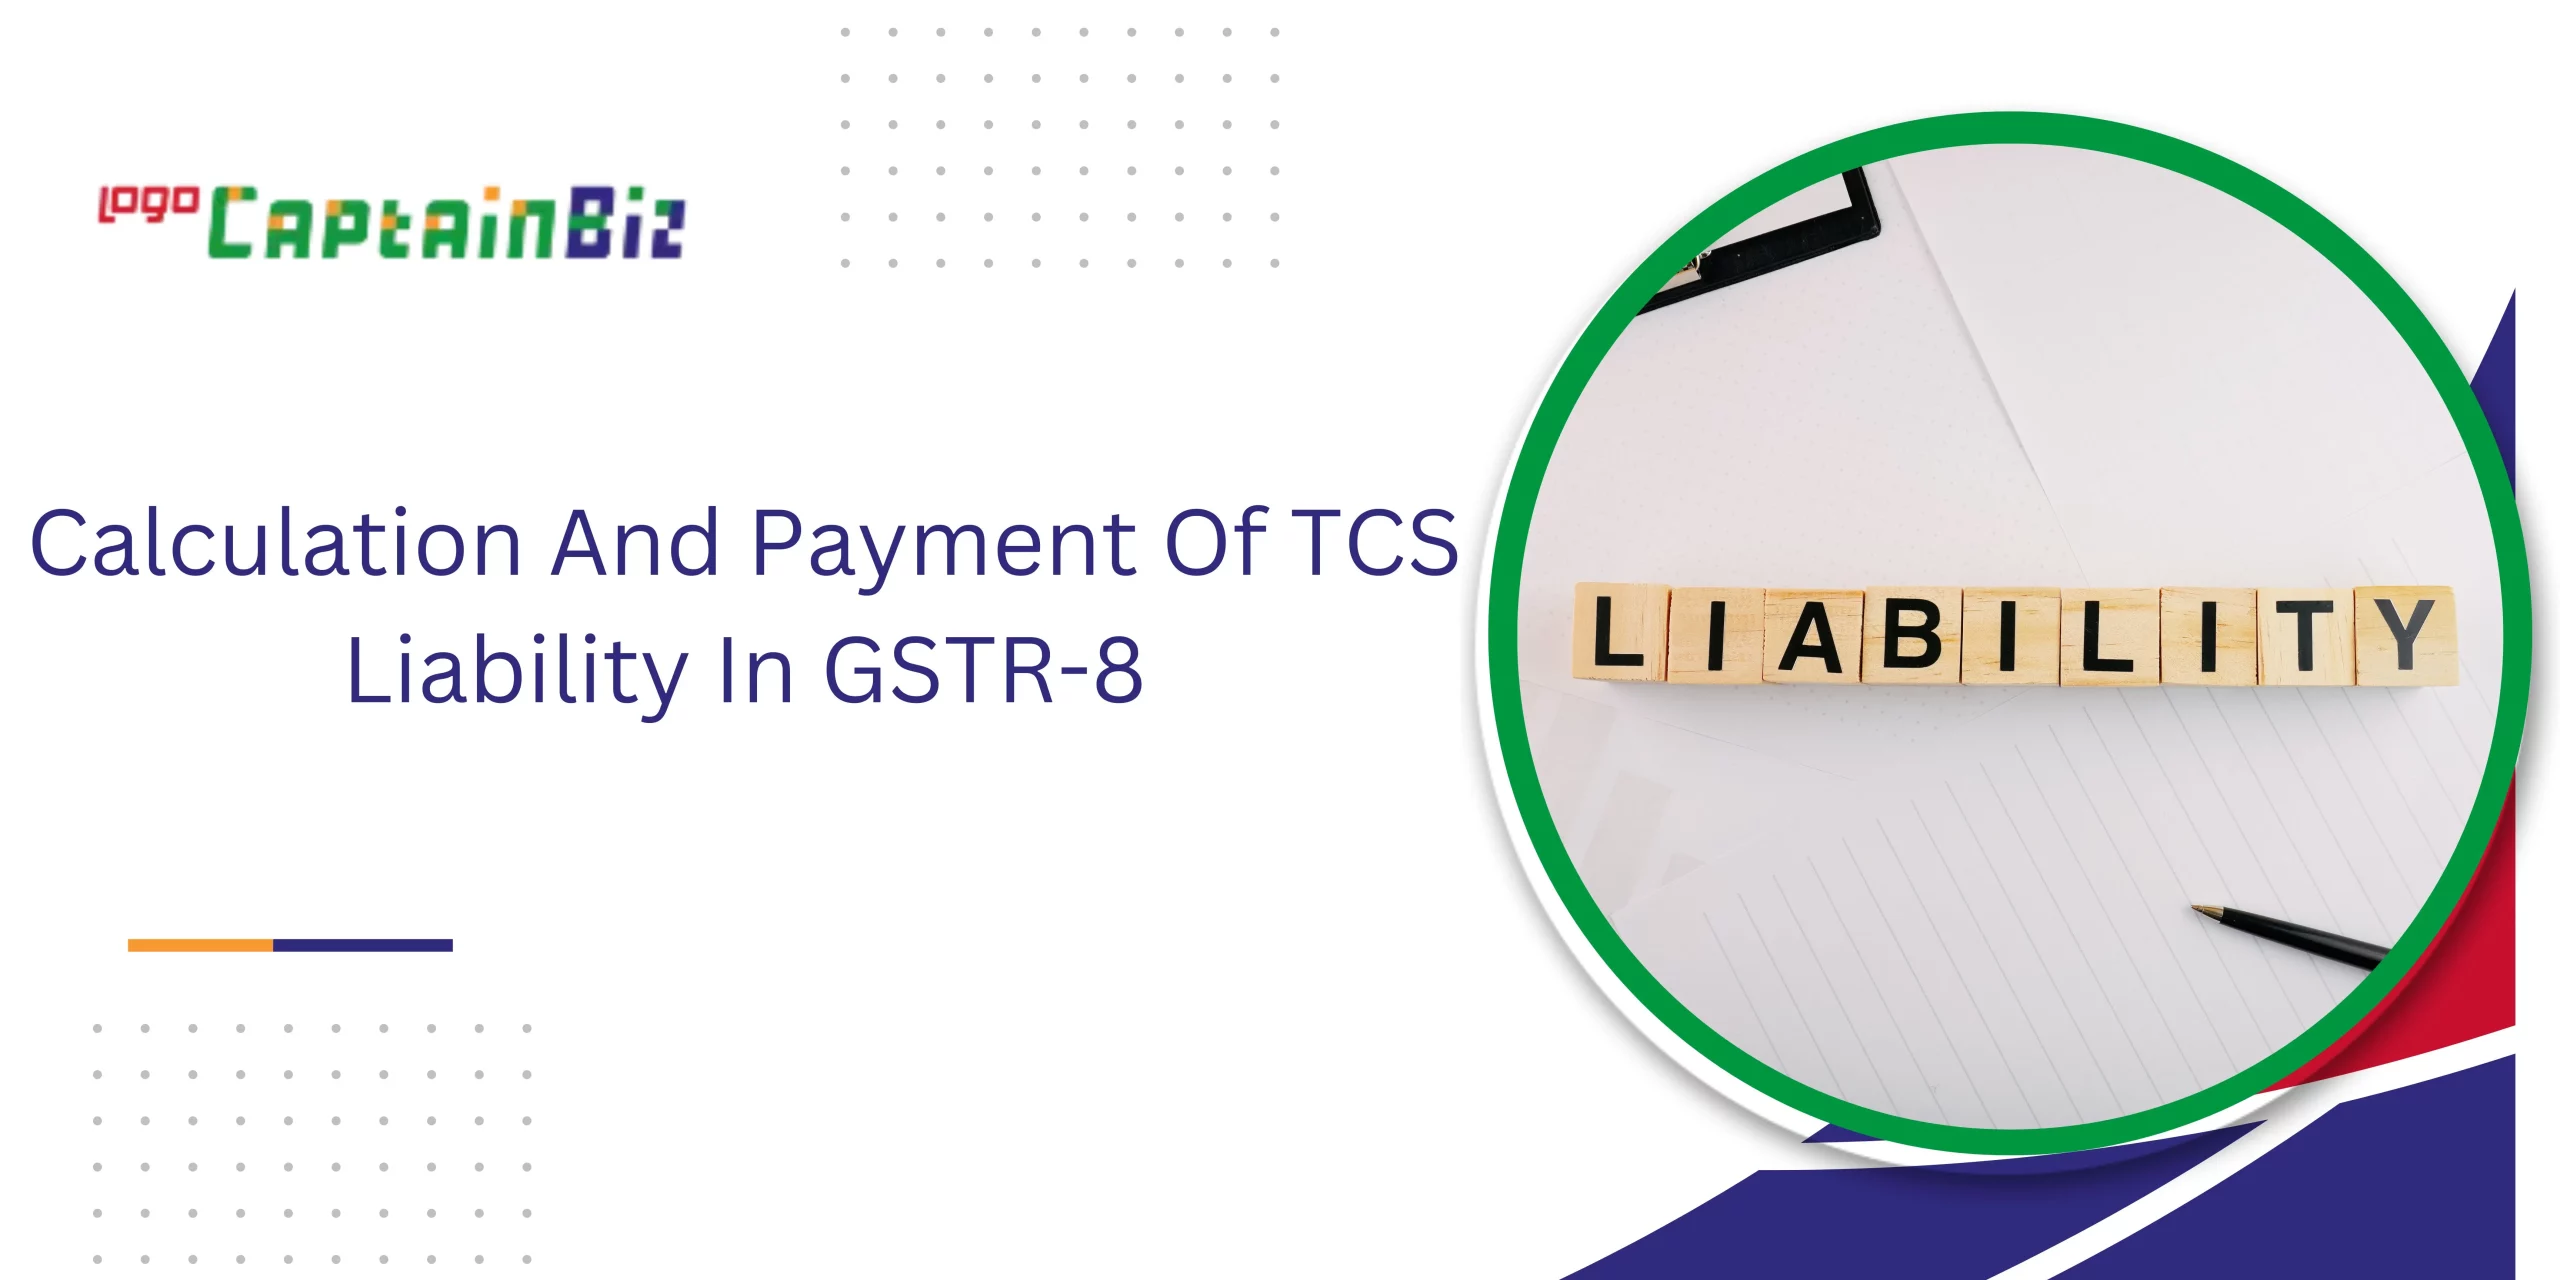 captainbiz calculation and payment of tcs liability in gstr